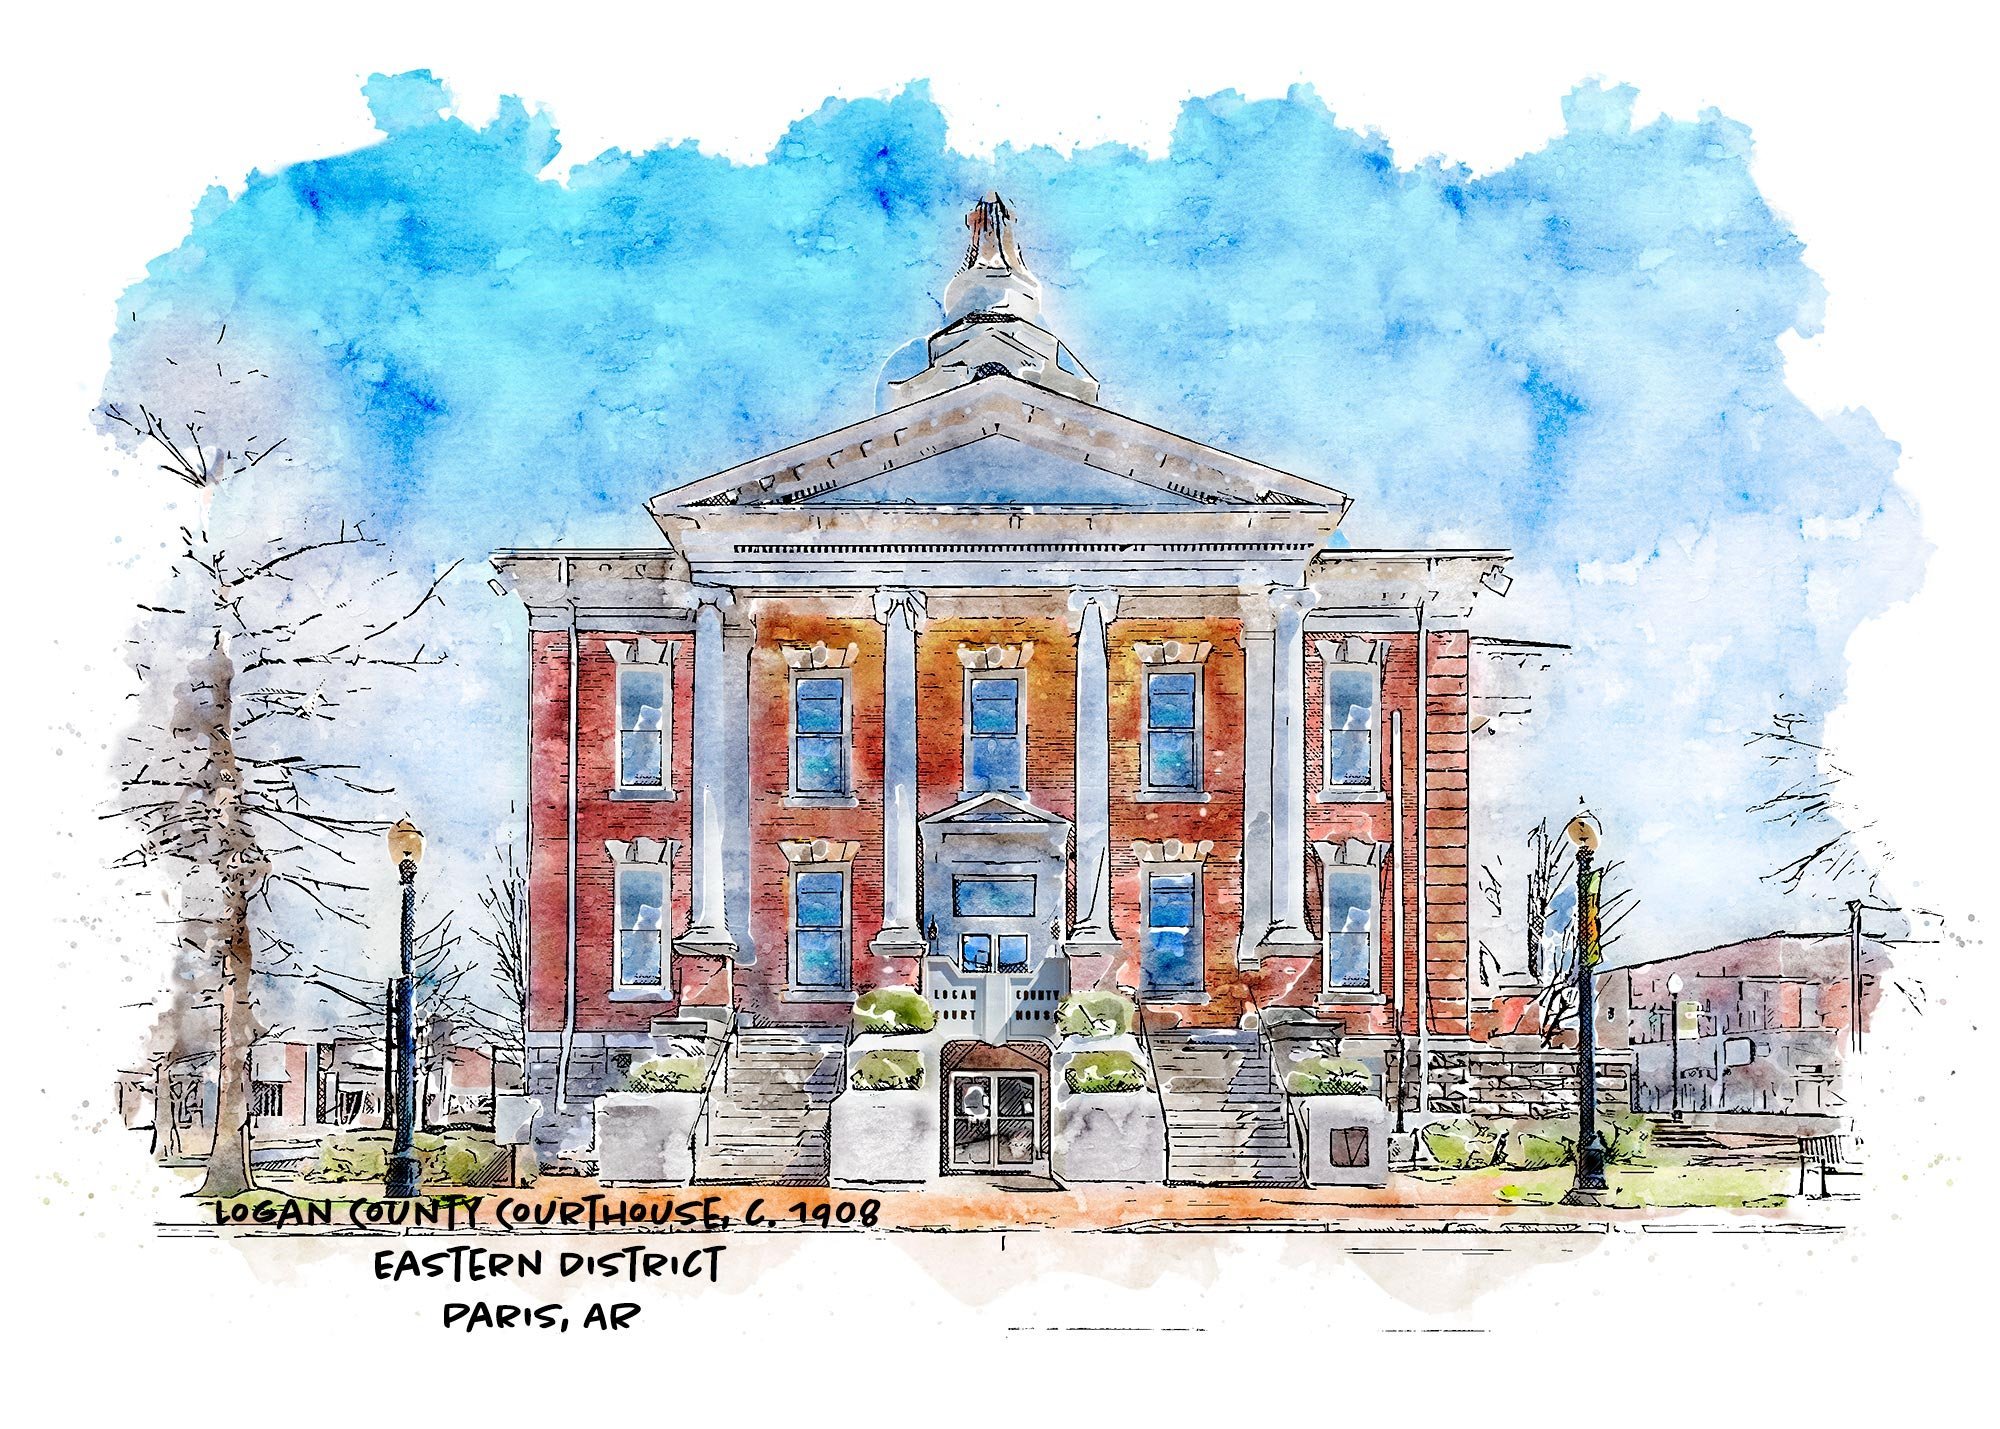 Is this a pretty #courthouse or what? The Logan County Courthouse, Eastern District, is set on Courthouse Square in Paris, Arkansas.  @parisarkansasmarket #parisarkansascourthouse #parisarkansas 
Find this courthouse and 28 other #Arkansas #Historic 